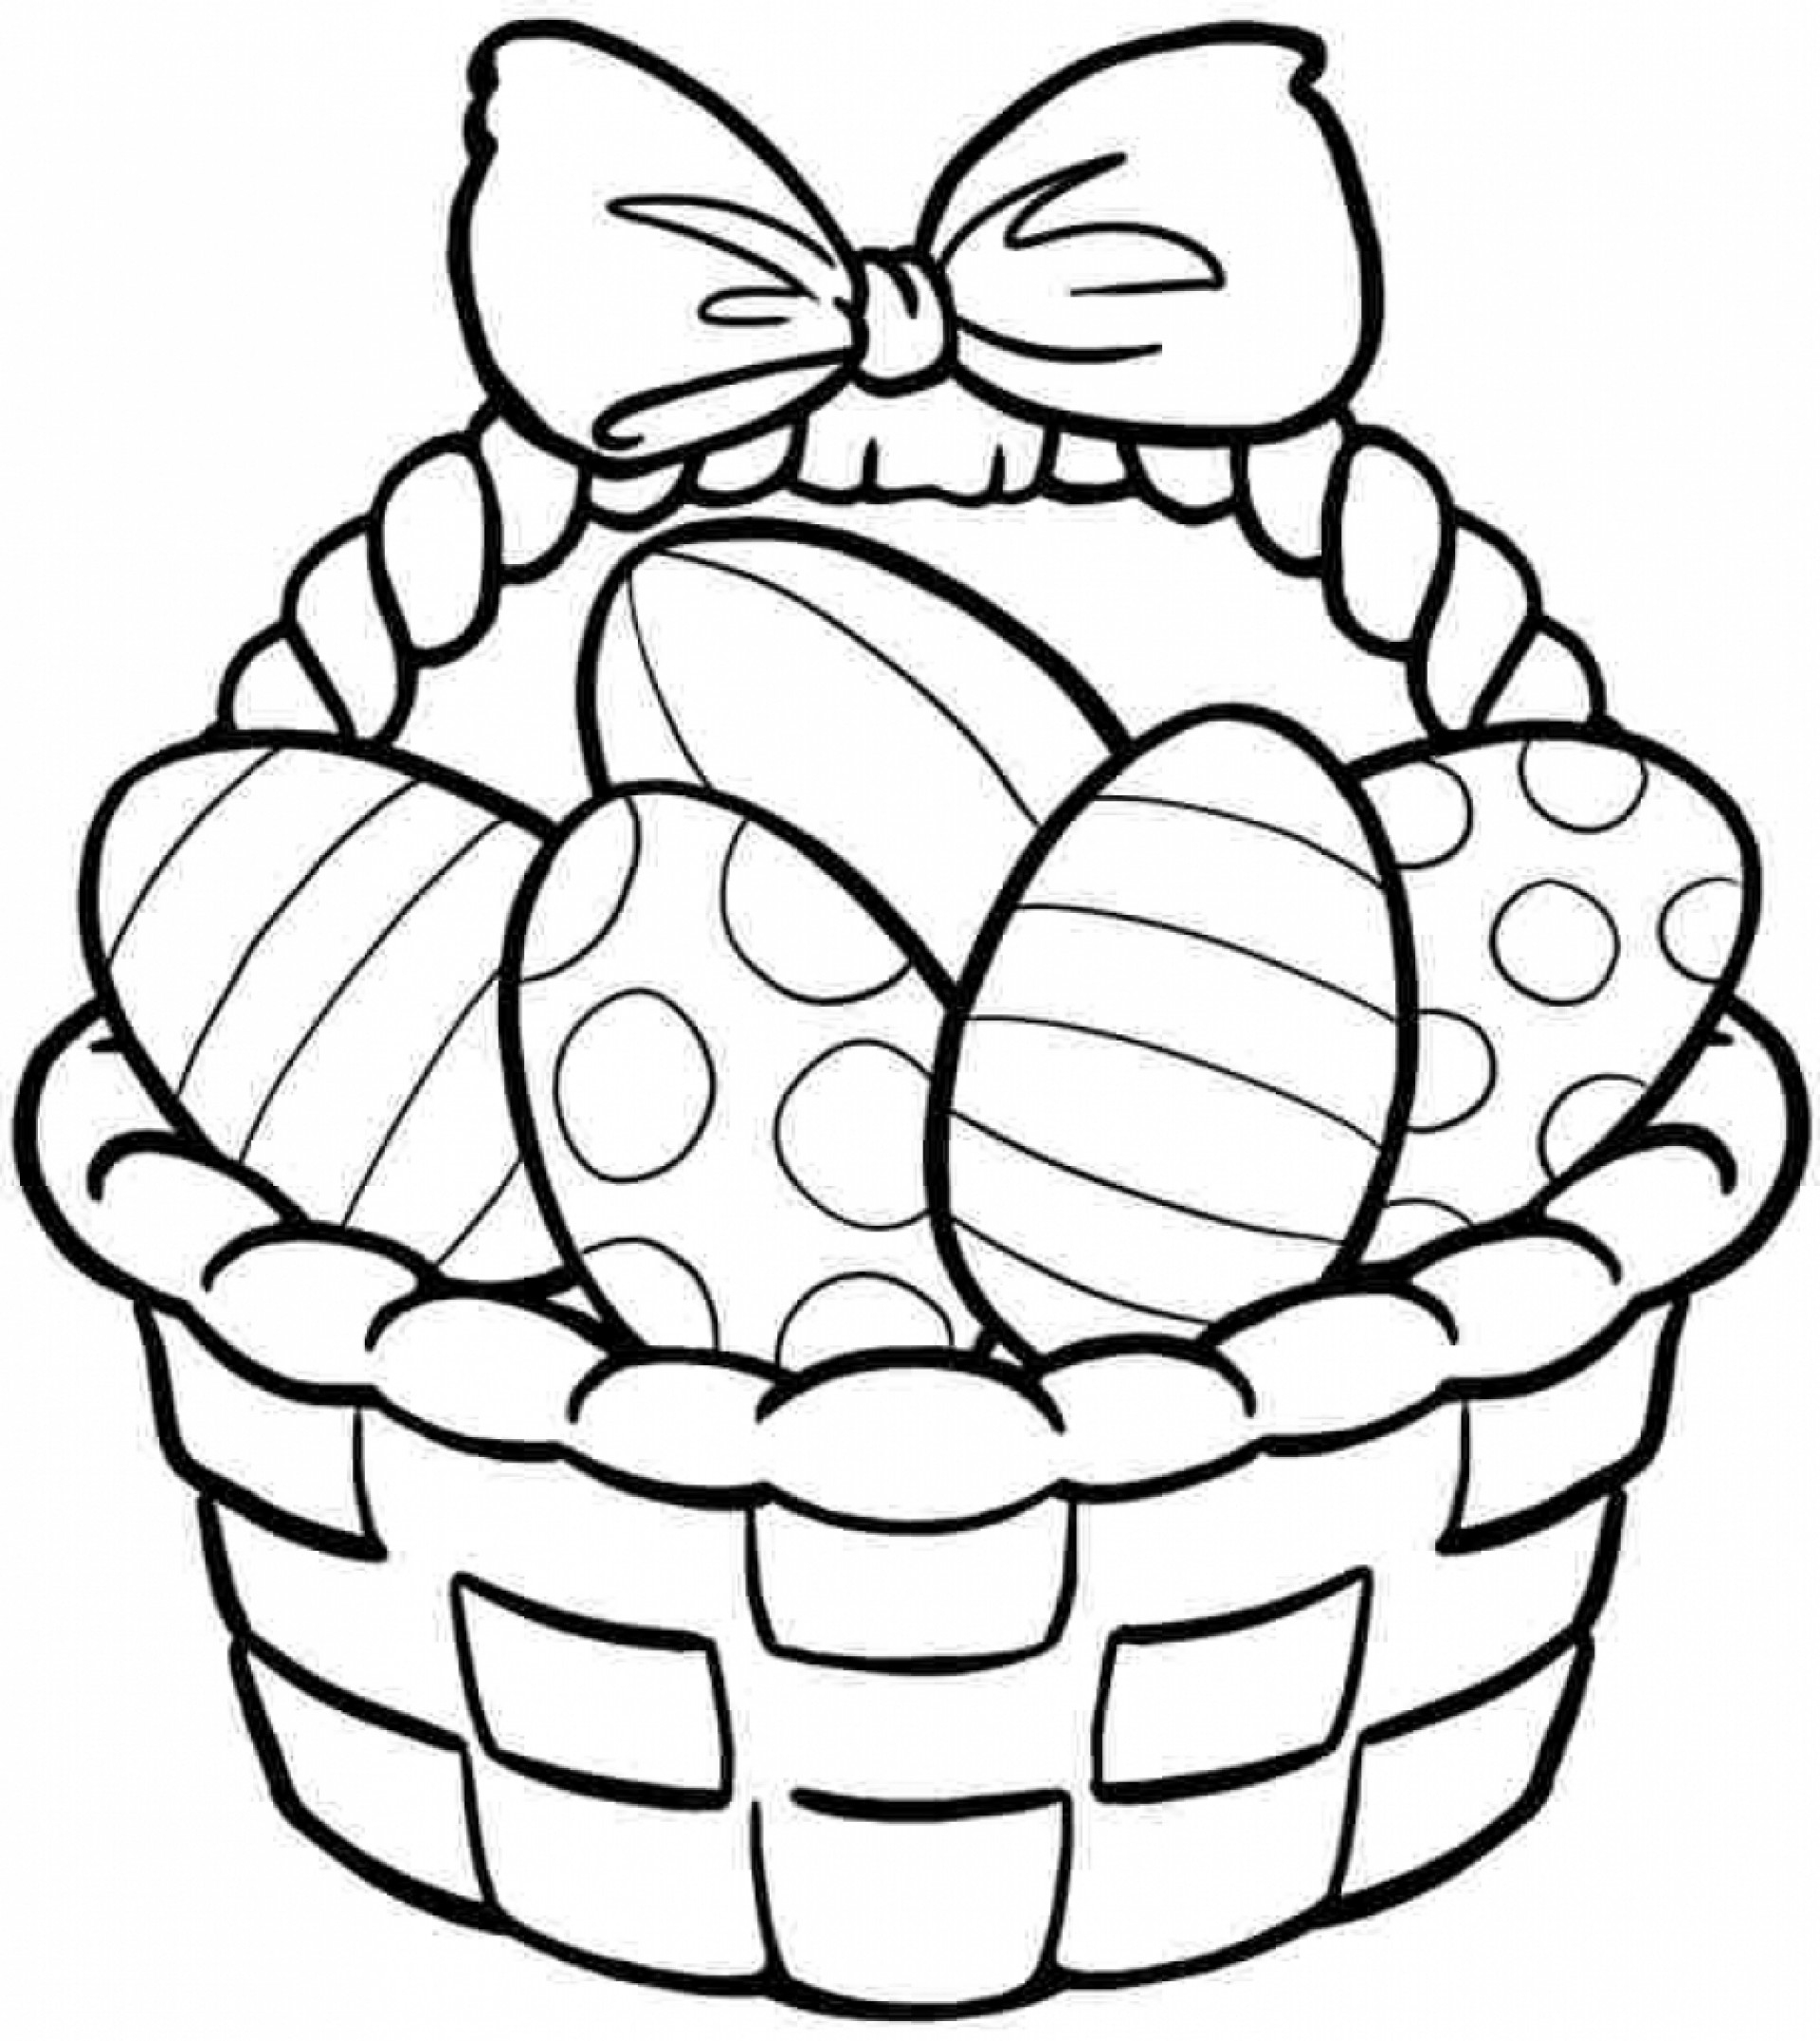 Coloring Pages : High Resolution Coloring Book Images Free Printable - Free Printable Coloring Pages Easter Basket